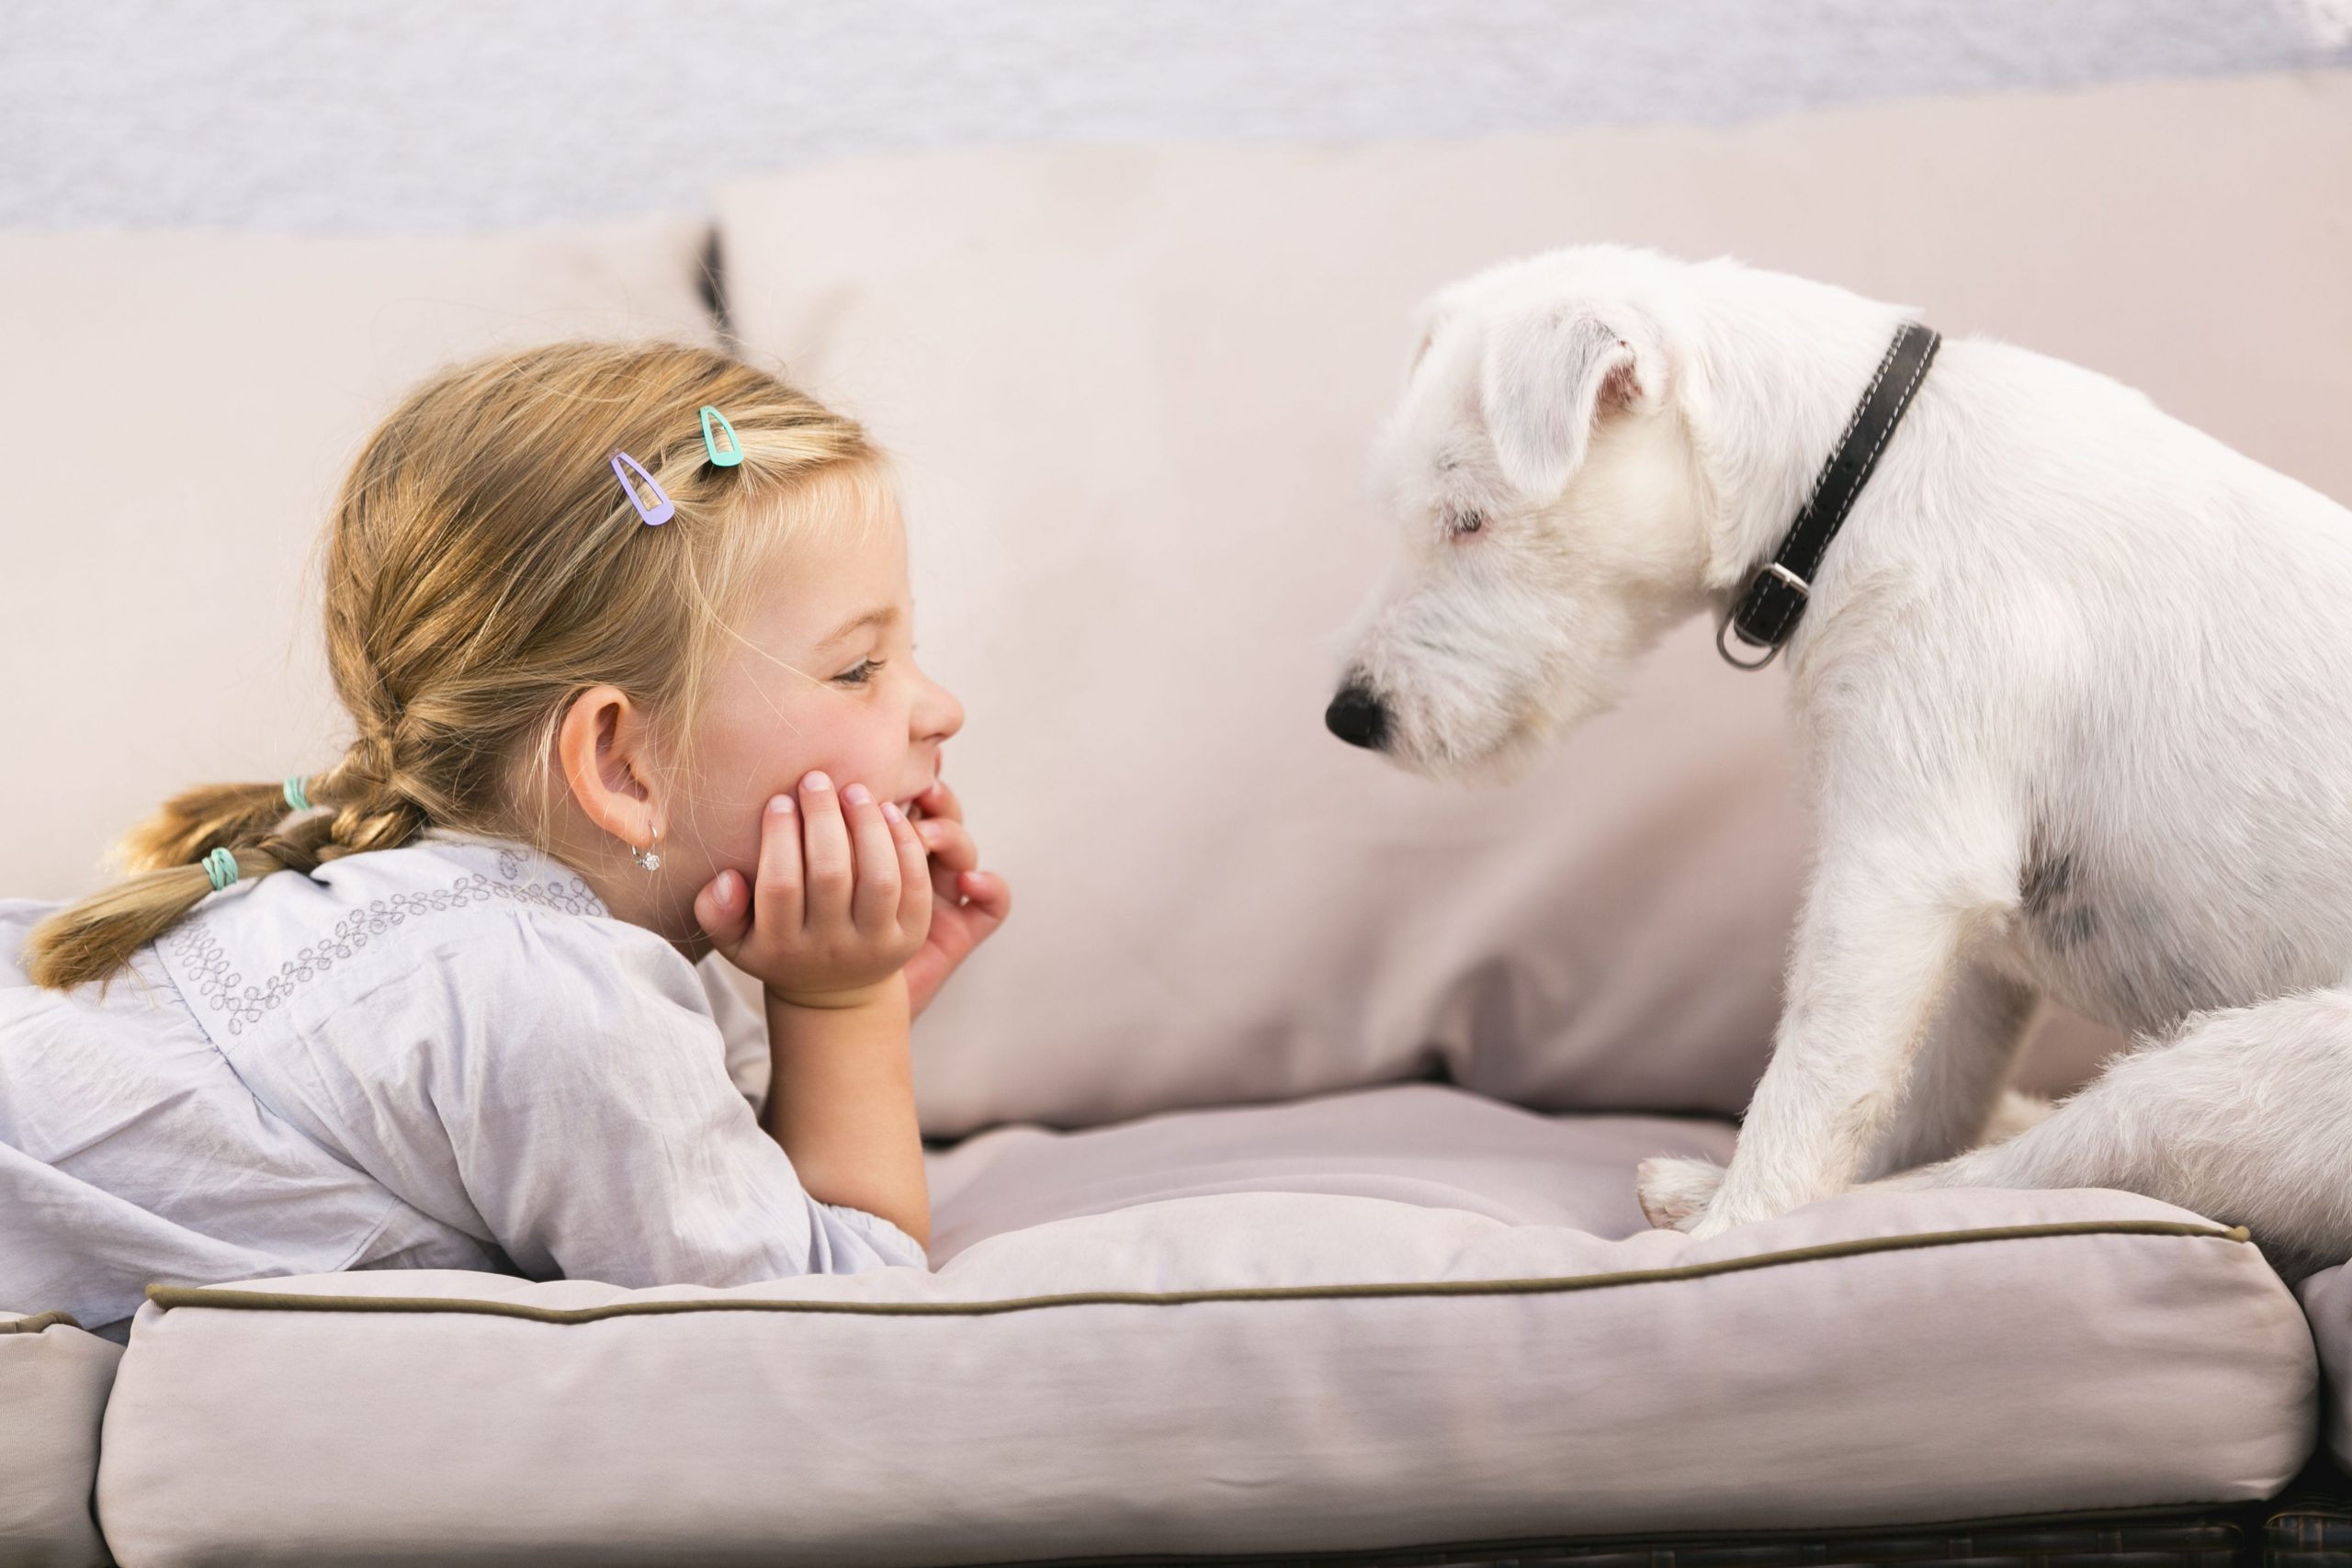 Little girl and dog looking at each other on the couch